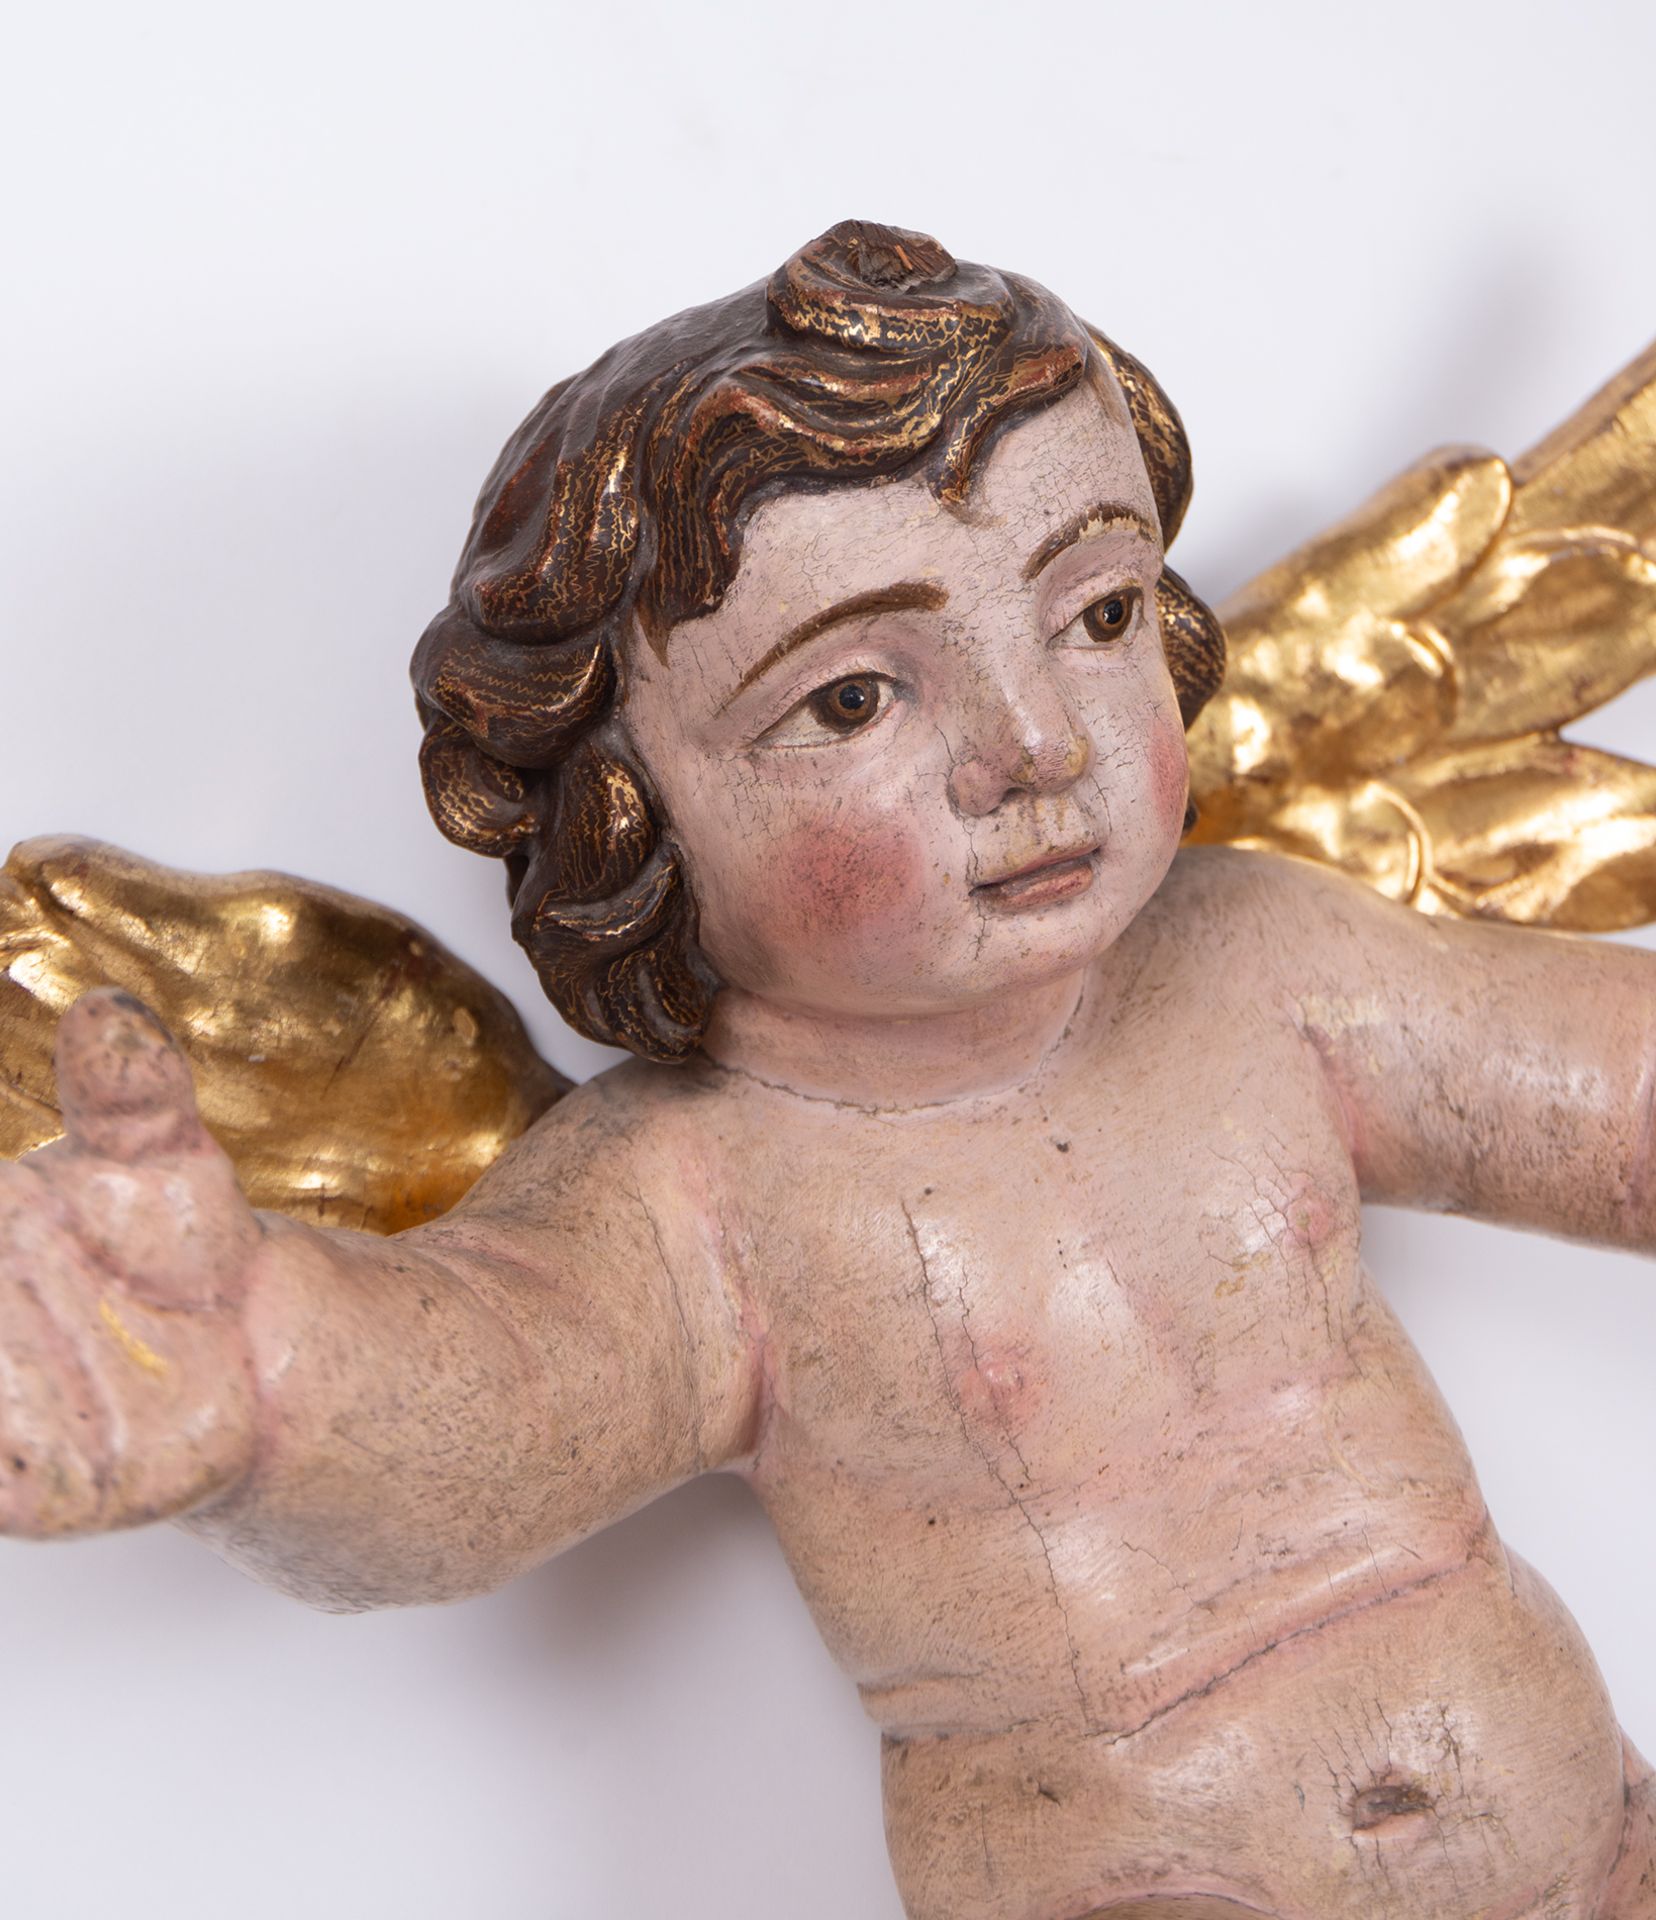 Pair of Wall Applique Angels, Portuguese school from the 17th - 18th centuries - Image 10 of 11